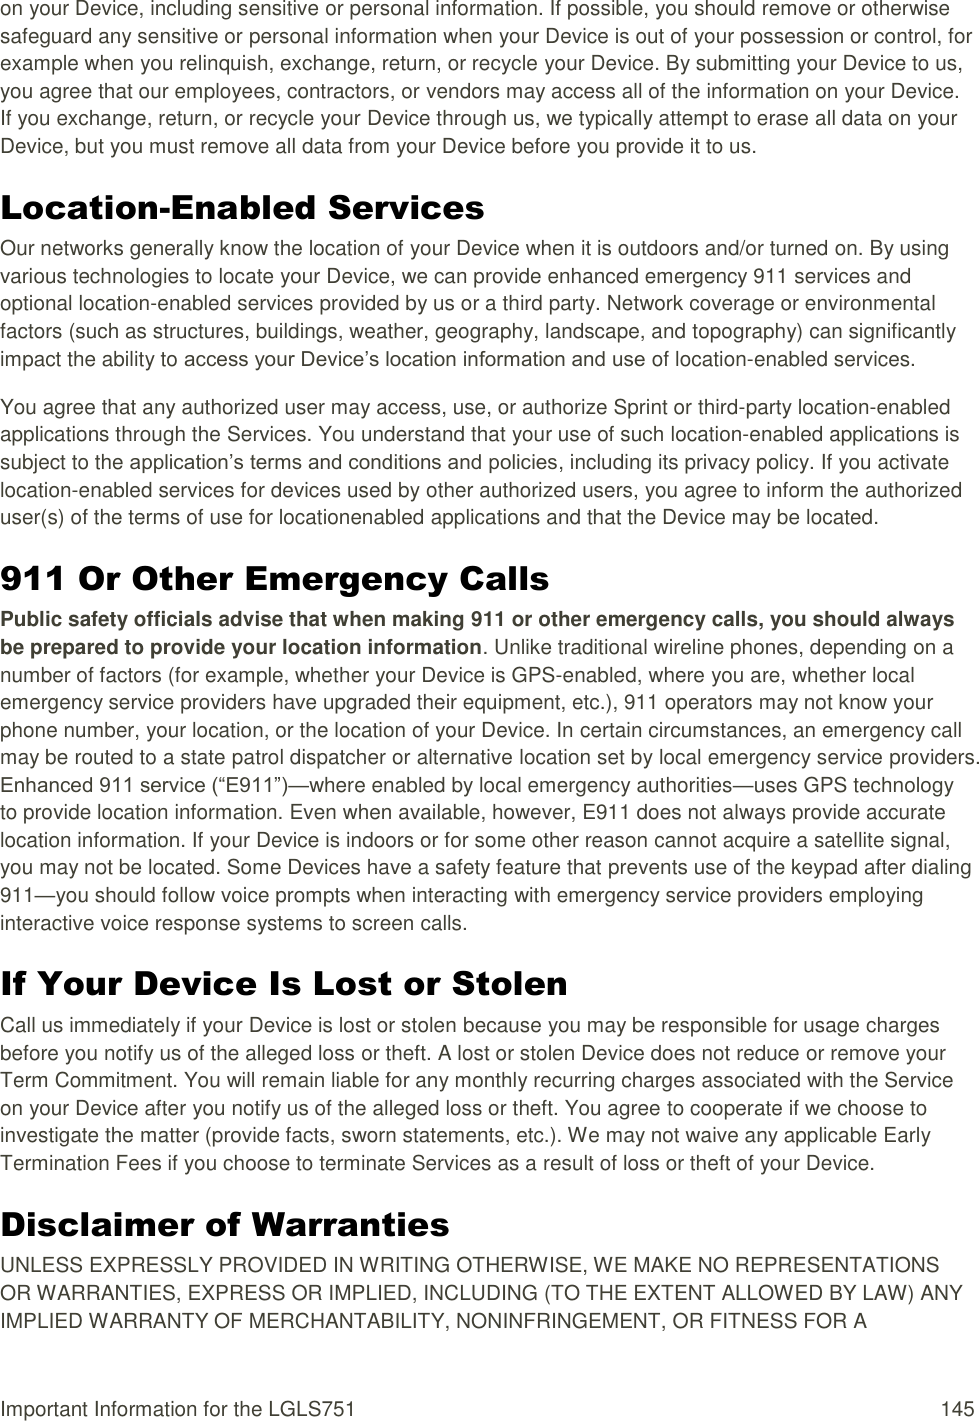 Important Information for the LGLS751  145 on your Device, including sensitive or personal information. If possible, you should remove or otherwise safeguard any sensitive or personal information when your Device is out of your possession or control, for example when you relinquish, exchange, return, or recycle your Device. By submitting your Device to us, you agree that our employees, contractors, or vendors may access all of the information on your Device. If you exchange, return, or recycle your Device through us, we typically attempt to erase all data on your Device, but you must remove all data from your Device before you provide it to us. Location-Enabled Services Our networks generally know the location of your Device when it is outdoors and/or turned on. By using various technologies to locate your Device, we can provide enhanced emergency 911 services and optional location-enabled services provided by us or a third party. Network coverage or environmental factors (such as structures, buildings, weather, geography, landscape, and topography) can significantly impact the ability to access your Device‘s location information and use of location-enabled services. You agree that any authorized user may access, use, or authorize Sprint or third-party location-enabled applications through the Services. You understand that your use of such location-enabled applications is subject to the application‘s terms and conditions and policies, including its privacy policy. If you activate location-enabled services for devices used by other authorized users, you agree to inform the authorized user(s) of the terms of use for locationenabled applications and that the Device may be located. 911 Or Other Emergency Calls Public safety officials advise that when making 911 or other emergency calls, you should always be prepared to provide your location information. Unlike traditional wireline phones, depending on a number of factors (for example, whether your Device is GPS-enabled, where you are, whether local emergency service providers have upgraded their equipment, etc.), 911 operators may not know your phone number, your location, or the location of your Device. In certain circumstances, an emergency call may be routed to a state patrol dispatcher or alternative location set by local emergency service providers. Enhanced 911 service (―E911‖)—where enabled by local emergency authorities—uses GPS technology to provide location information. Even when available, however, E911 does not always provide accurate location information. If your Device is indoors or for some other reason cannot acquire a satellite signal, you may not be located. Some Devices have a safety feature that prevents use of the keypad after dialing 911—you should follow voice prompts when interacting with emergency service providers employing interactive voice response systems to screen calls. If Your Device Is Lost or Stolen Call us immediately if your Device is lost or stolen because you may be responsible for usage charges before you notify us of the alleged loss or theft. A lost or stolen Device does not reduce or remove your Term Commitment. You will remain liable for any monthly recurring charges associated with the Service on your Device after you notify us of the alleged loss or theft. You agree to cooperate if we choose to investigate the matter (provide facts, sworn statements, etc.). We may not waive any applicable Early Termination Fees if you choose to terminate Services as a result of loss or theft of your Device. Disclaimer of Warranties UNLESS EXPRESSLY PROVIDED IN WRITING OTHERWISE, WE MAKE NO REPRESENTATIONS OR WARRANTIES, EXPRESS OR IMPLIED, INCLUDING (TO THE EXTENT ALLOWED BY LAW) ANY IMPLIED WARRANTY OF MERCHANTABILITY, NONINFRINGEMENT, OR FITNESS FOR A 